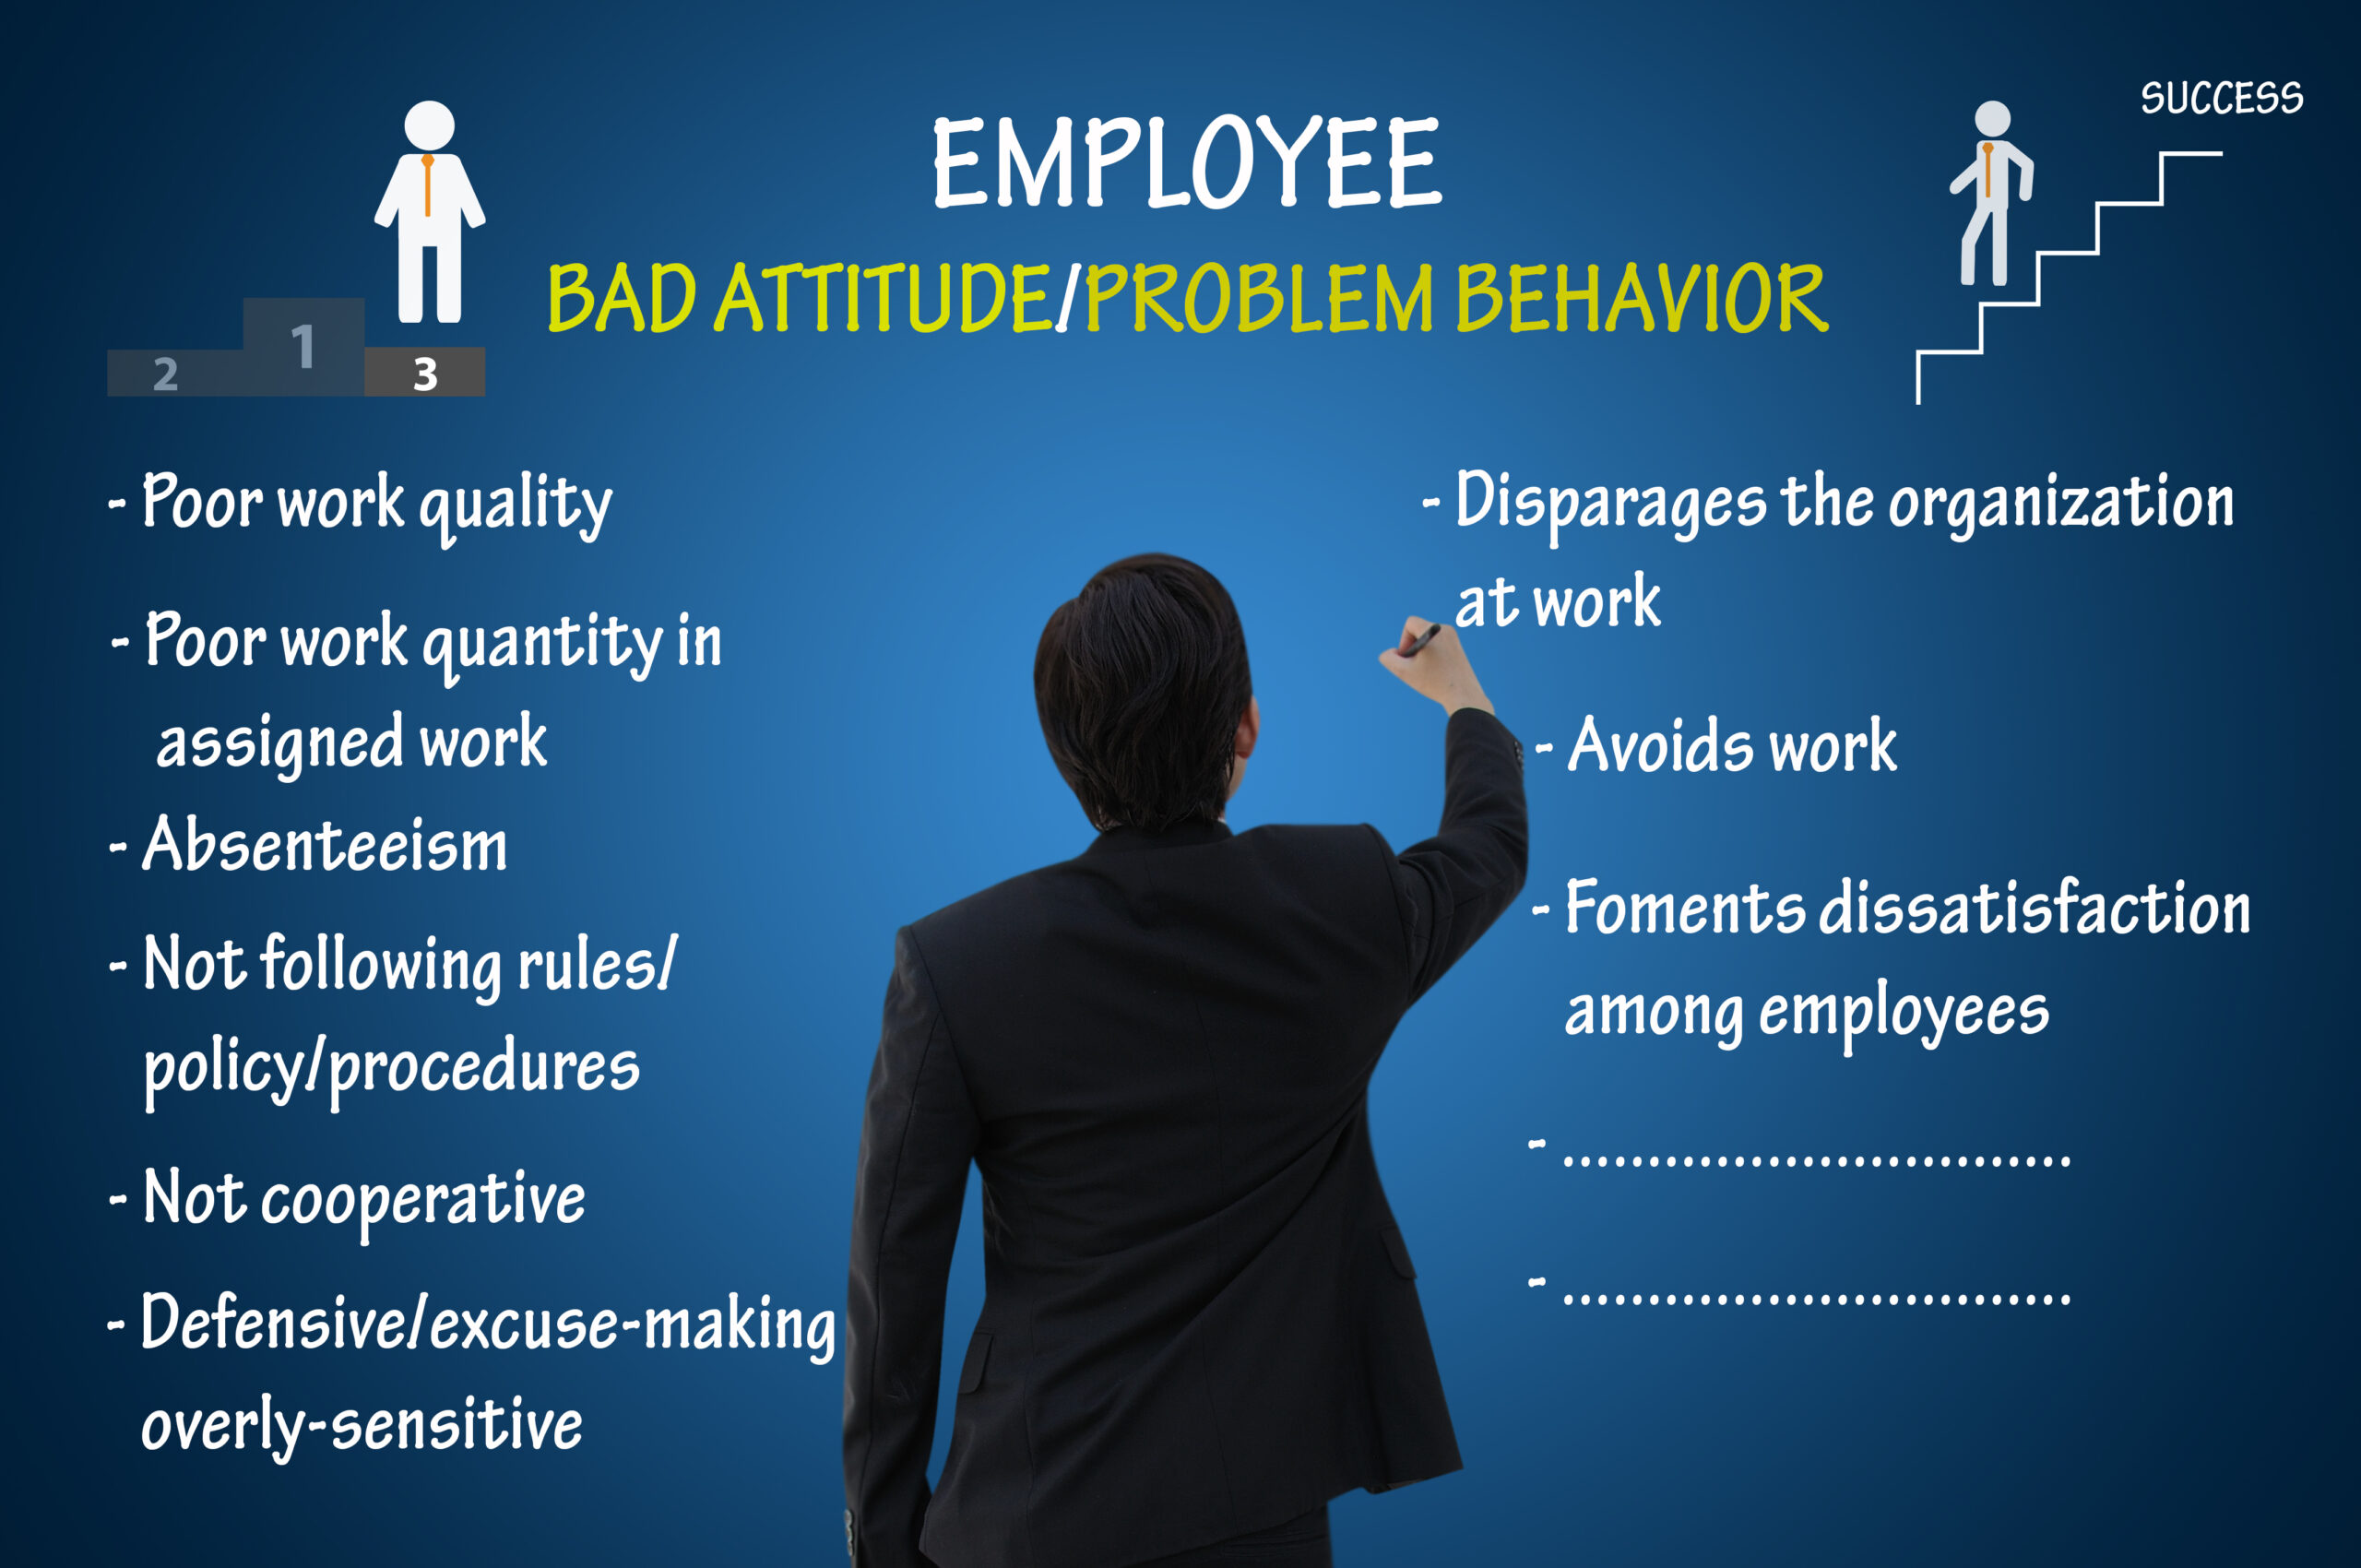 What Are Appropriate Workplace Behaviors and Attitude?